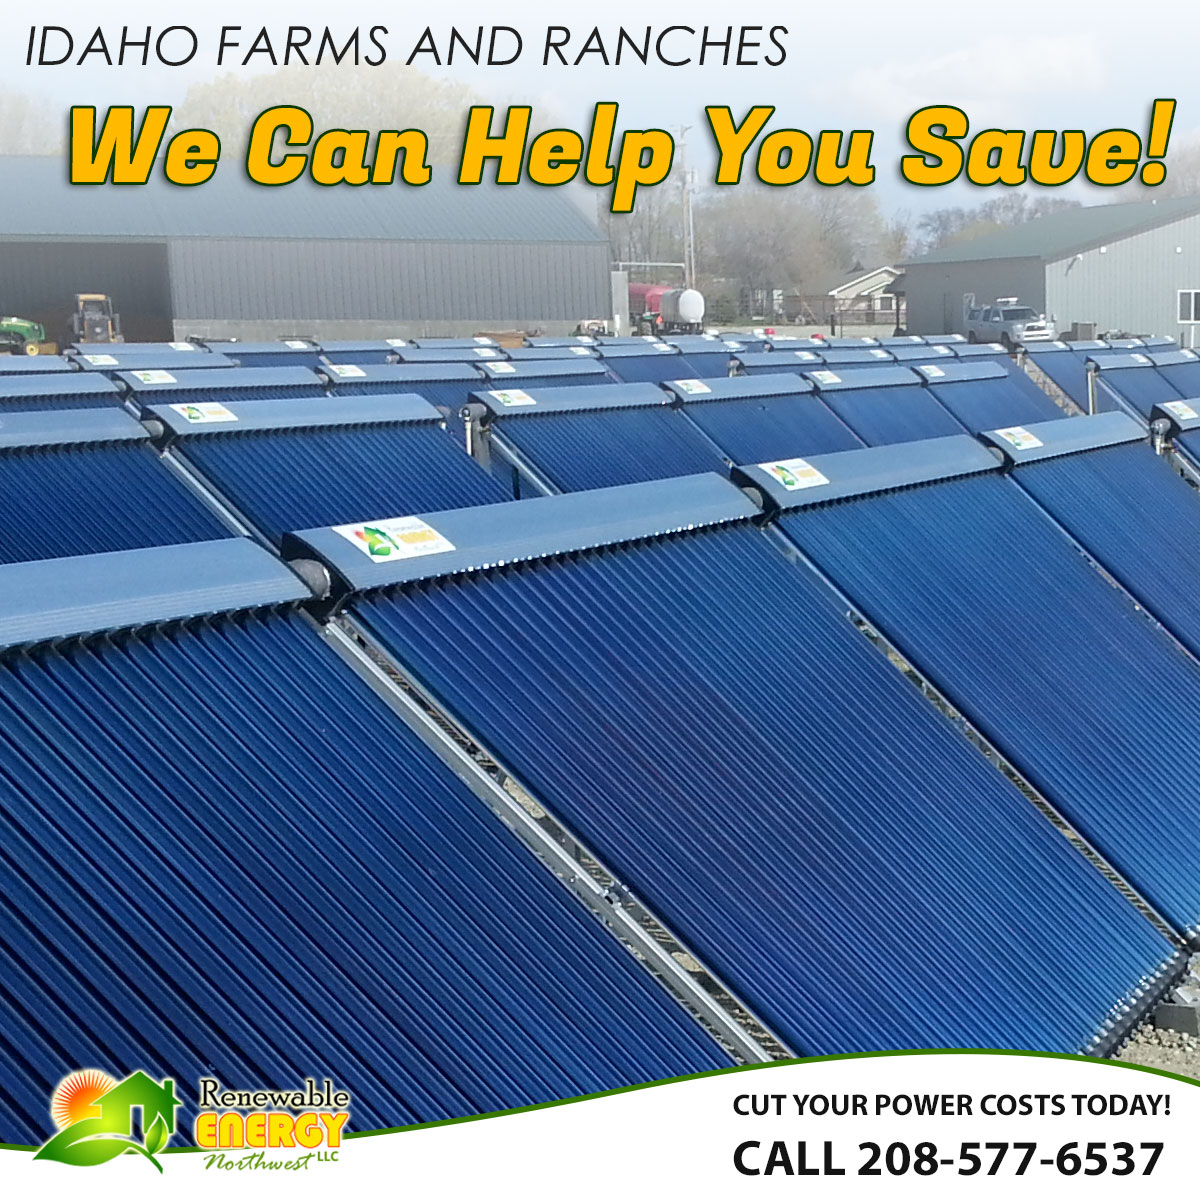 Why Farms and Ranches In Idaho Are Installing Solar!